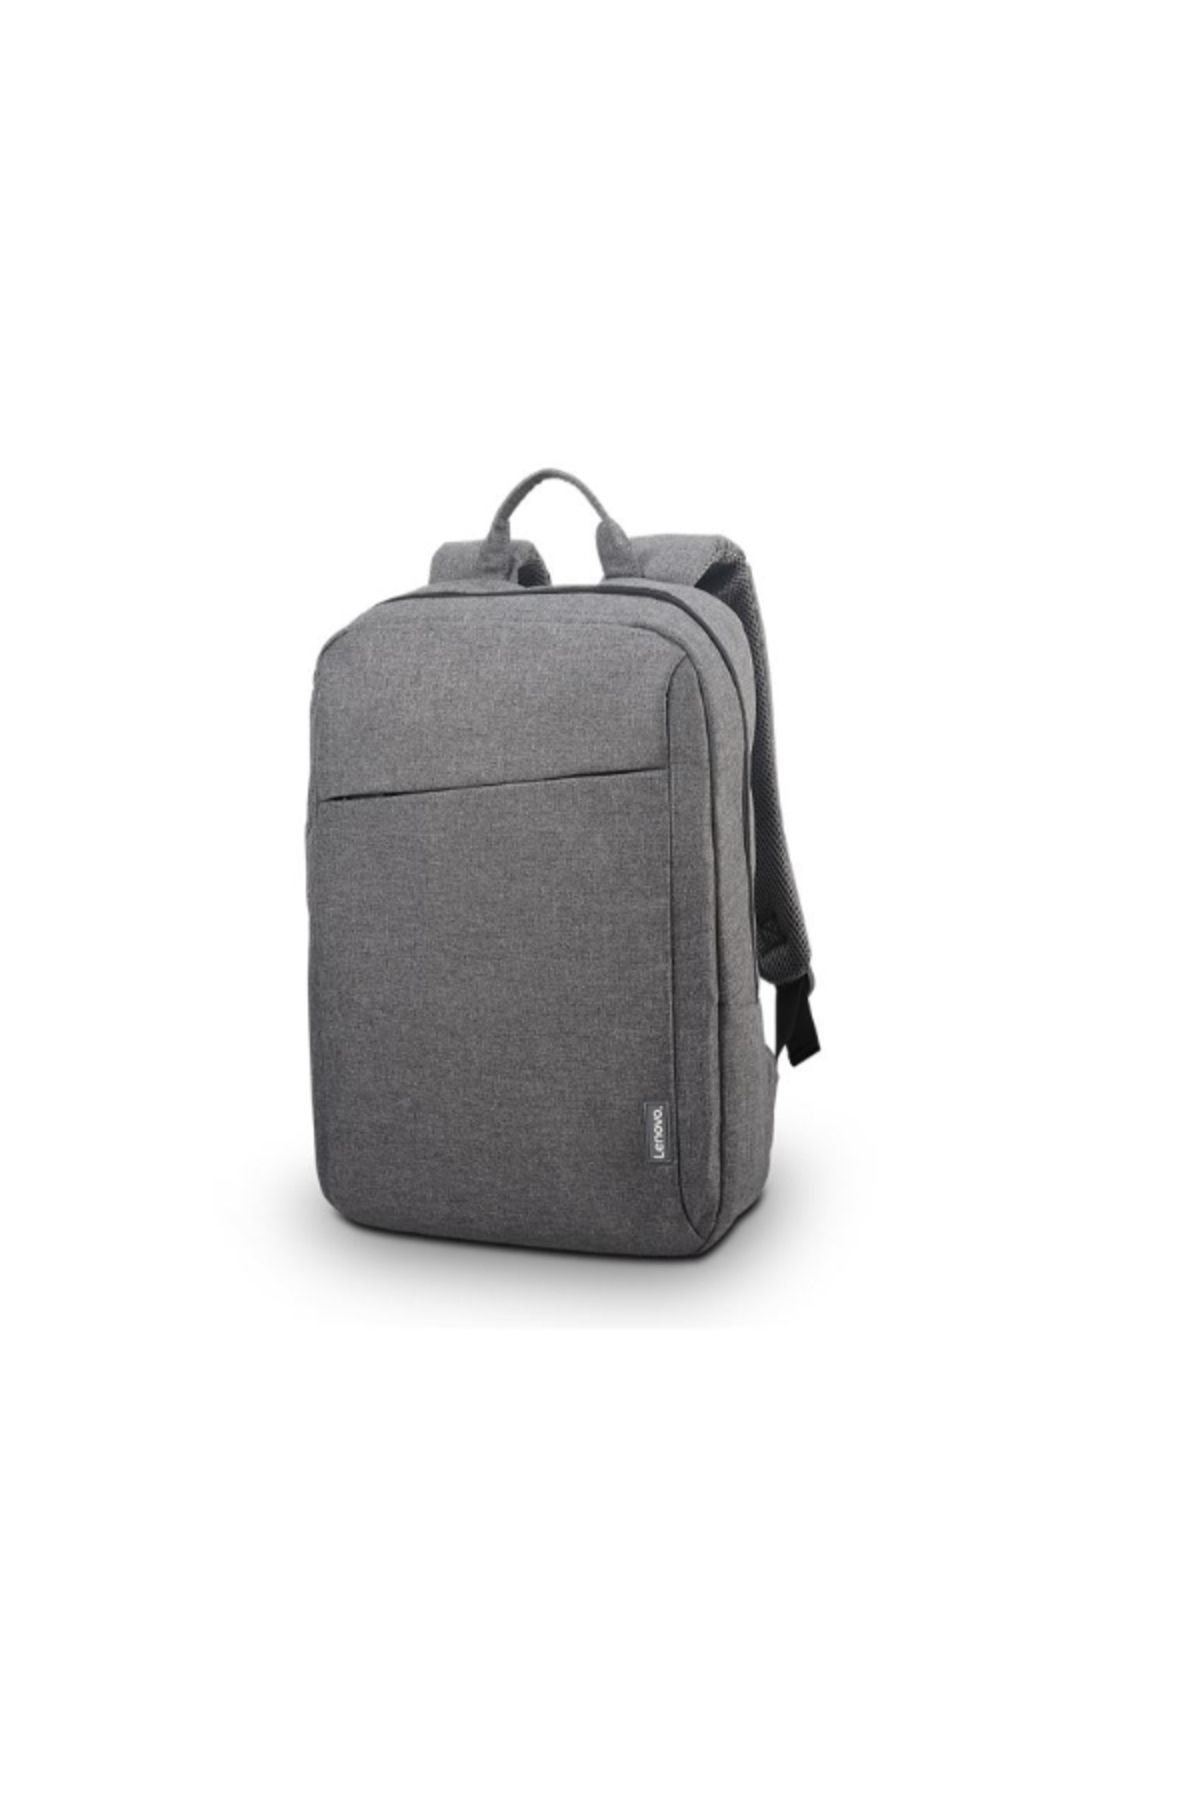 LENOVO 15.6 inch Laptop Casual Backpack B210 Gri 4X40T84058